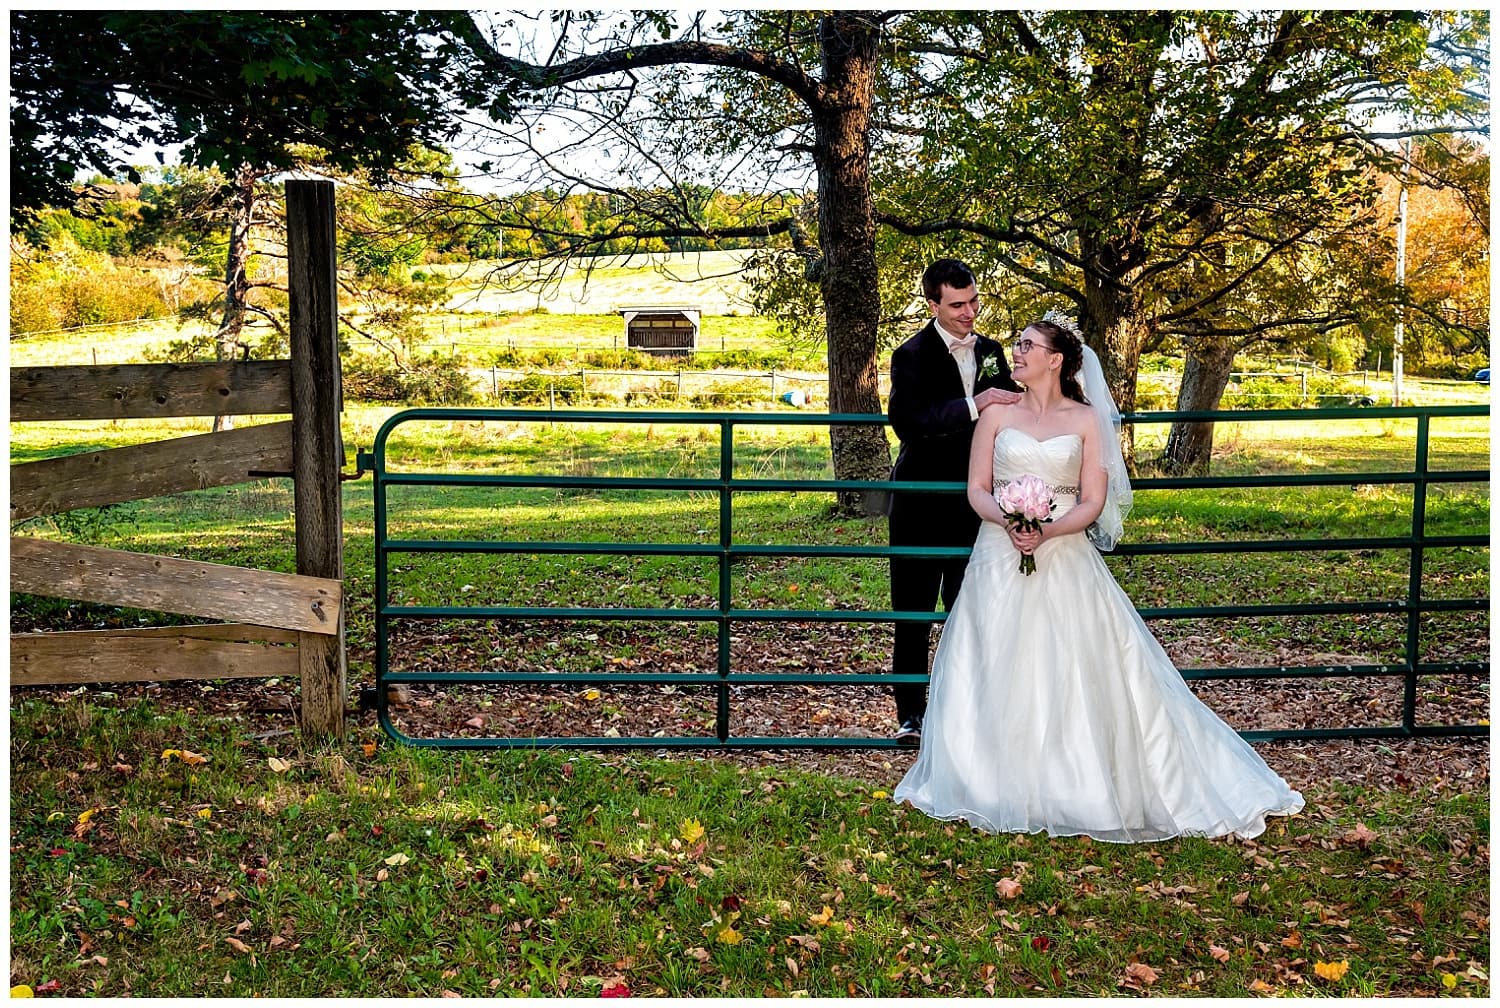 A bride and groom gaze at each other by a fence at the Kinley Farm in Lunenburg, NS.